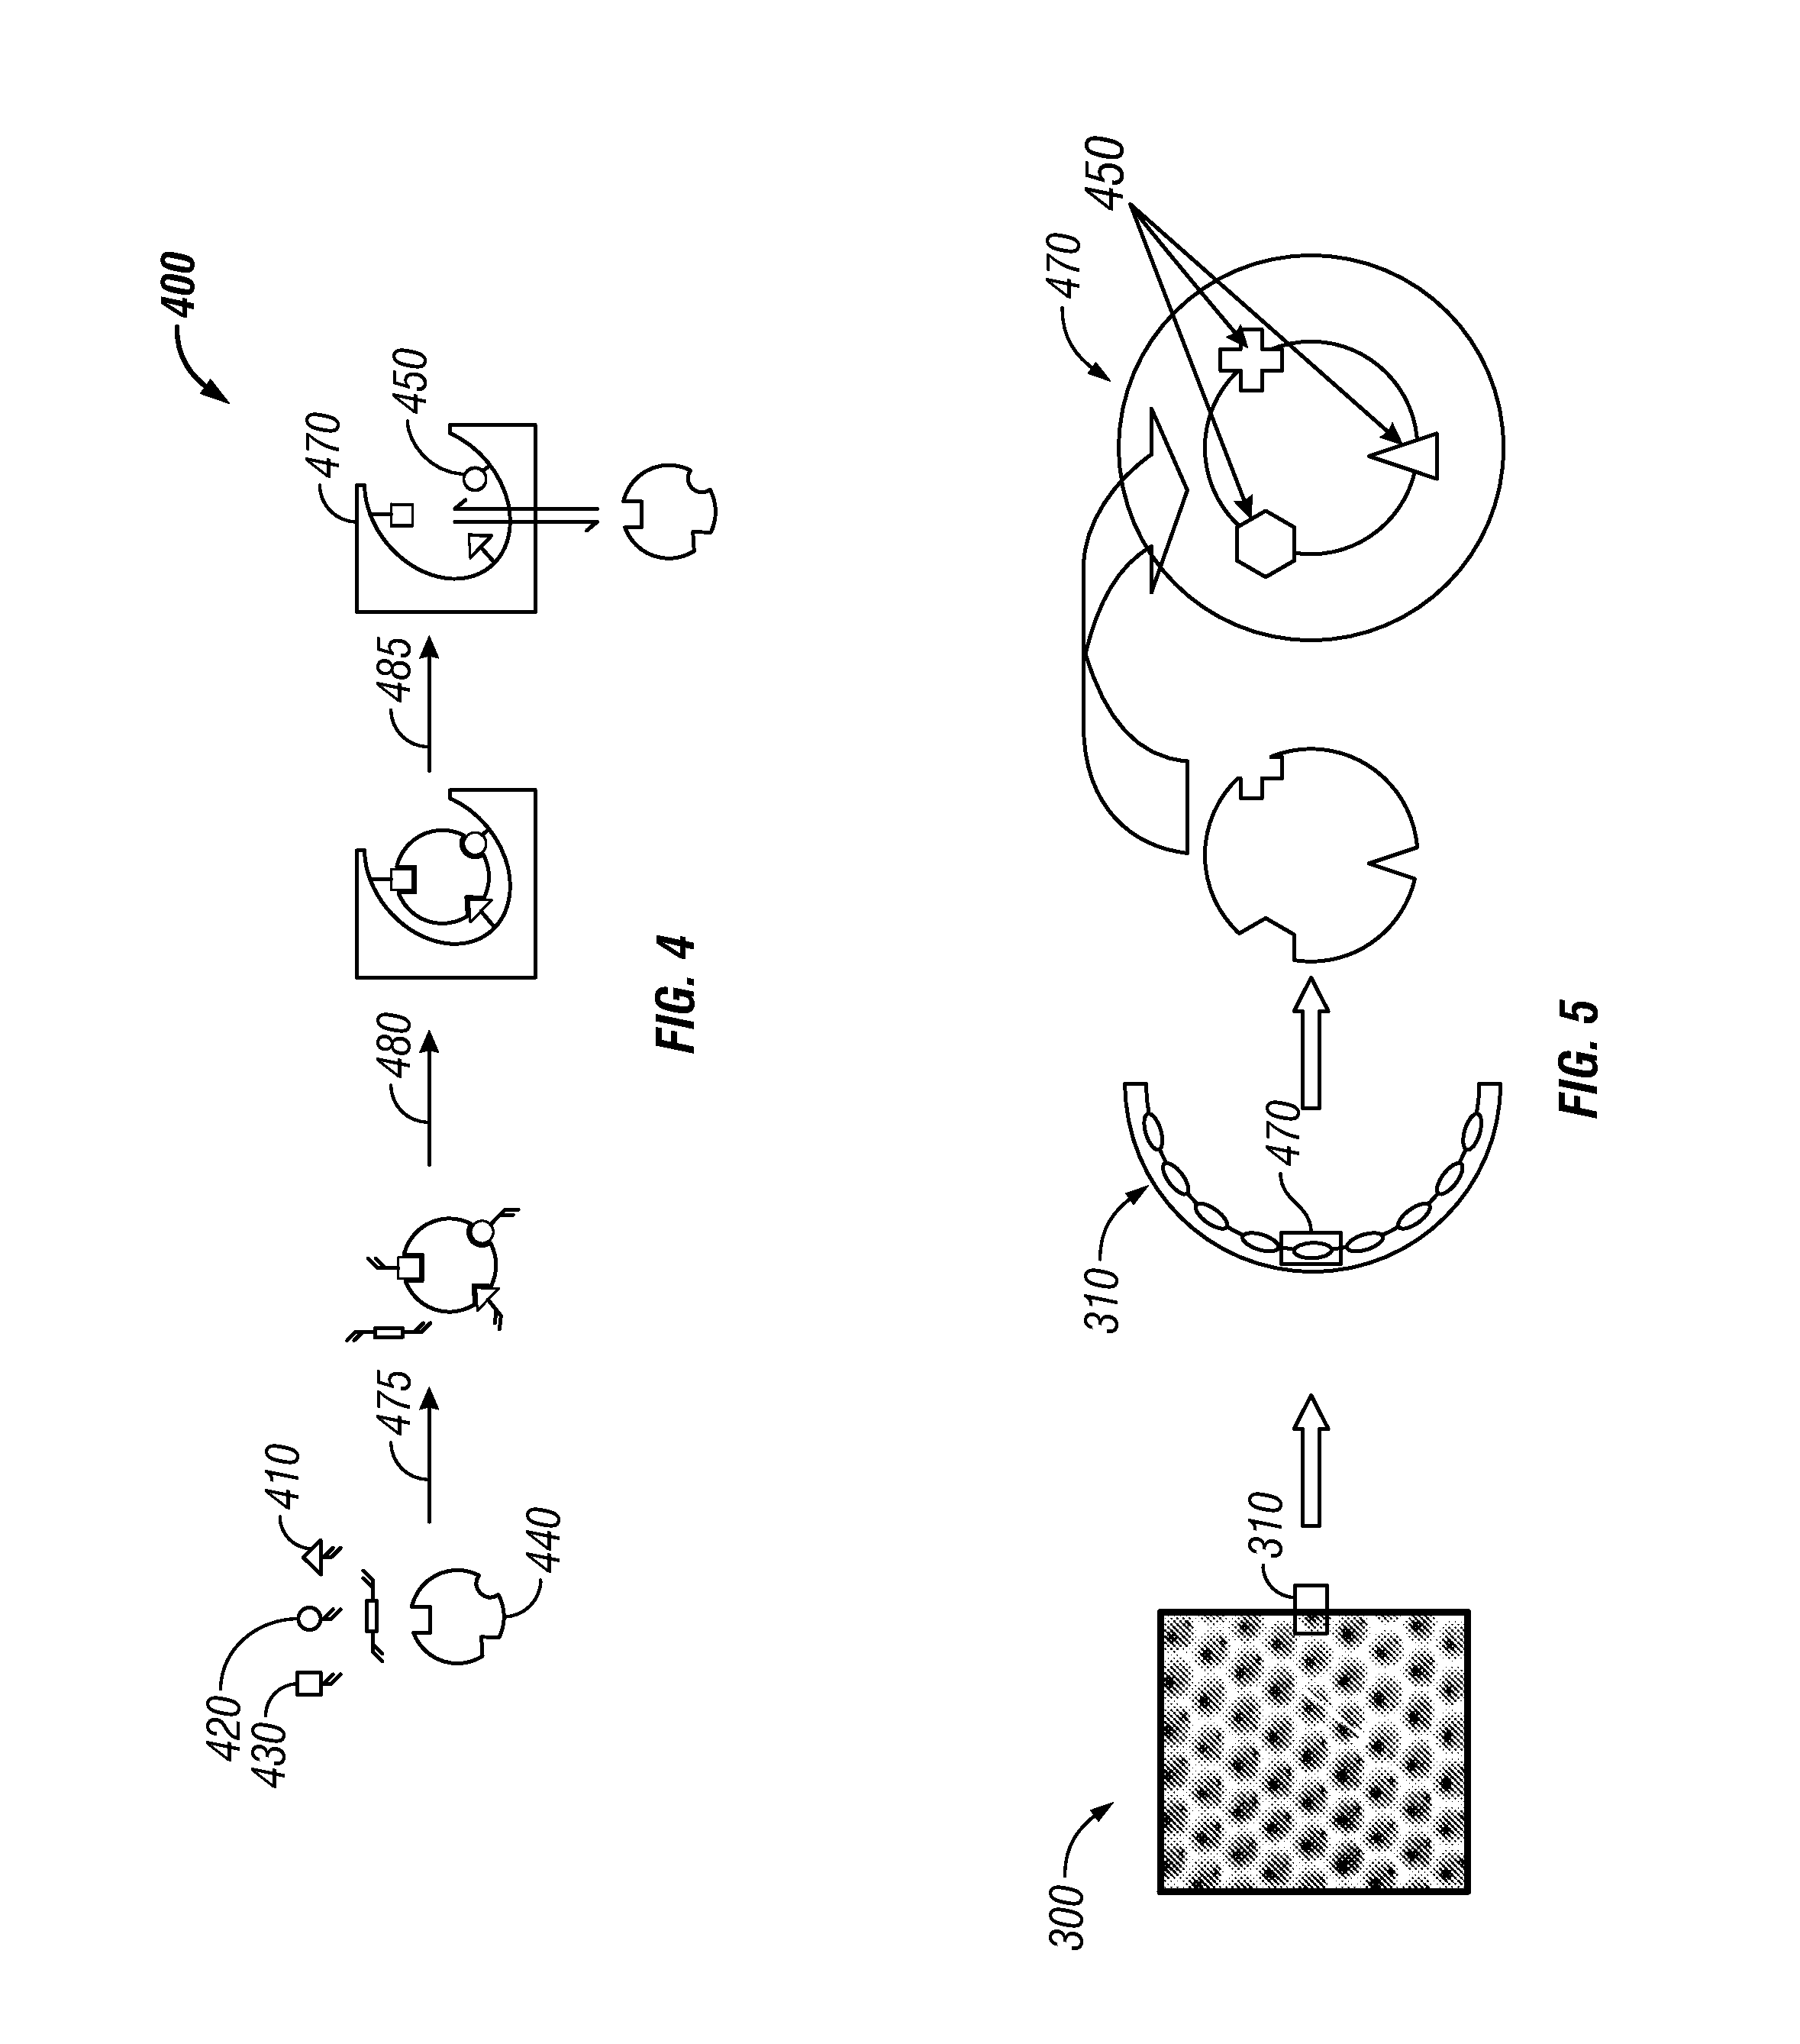 Molecular imprinted three-dimensionally ordered macroporous sensor and method of forming the same